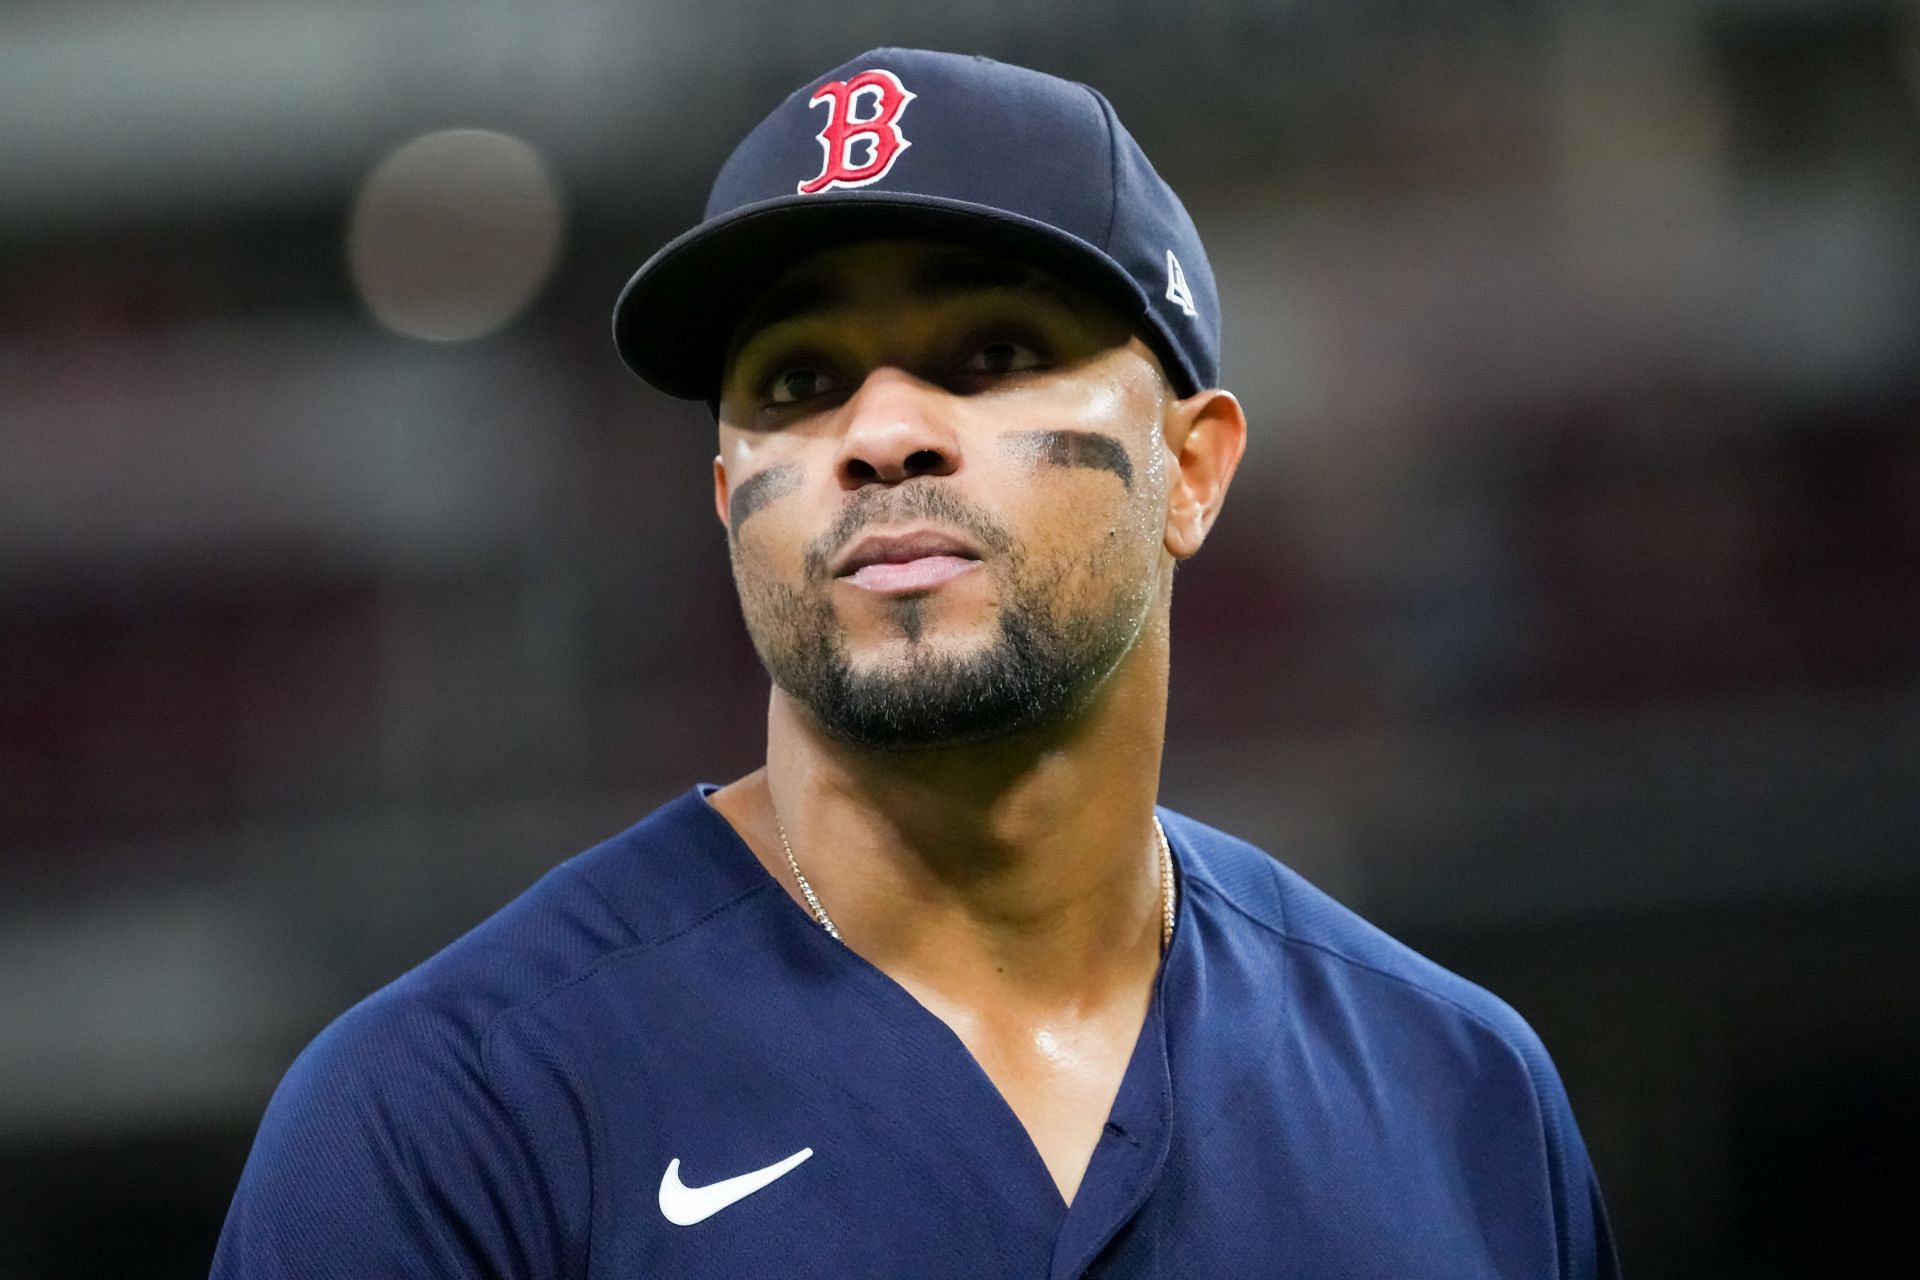 The Red Sox X-Factors in 2022 are not Trevor Story or Xander Bogaerts